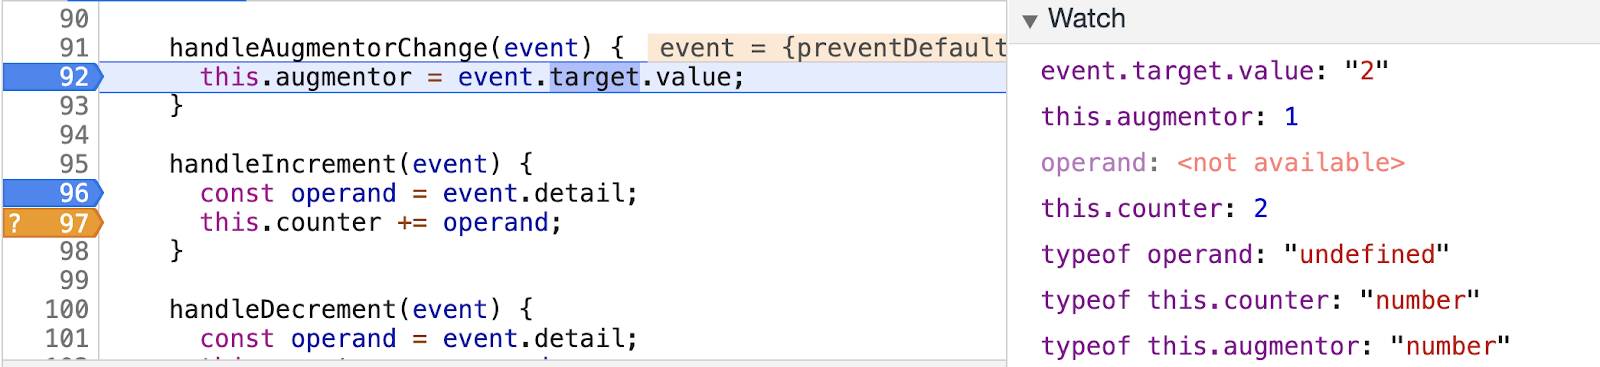 In the Code Editor, execution is paused on the first line of the handleAugmentorChange function. this.augmentor = event.target.value. Watch shows event.target.value = 2 (in quotation marks).